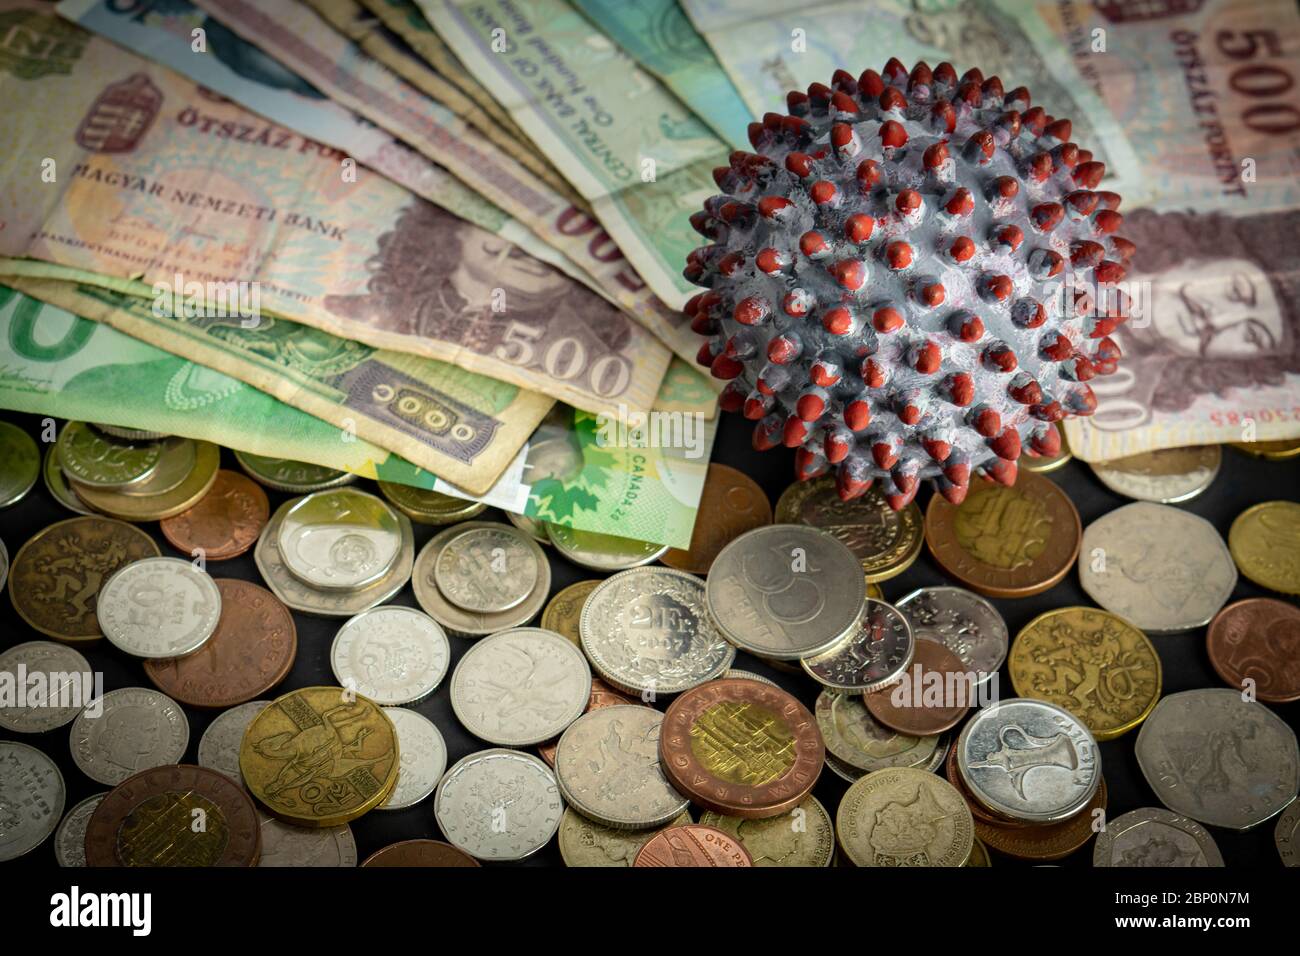 A ball painted like a SARS-CoV-2 virion on the middle of many banknotes and coins from different countries Stock Photo